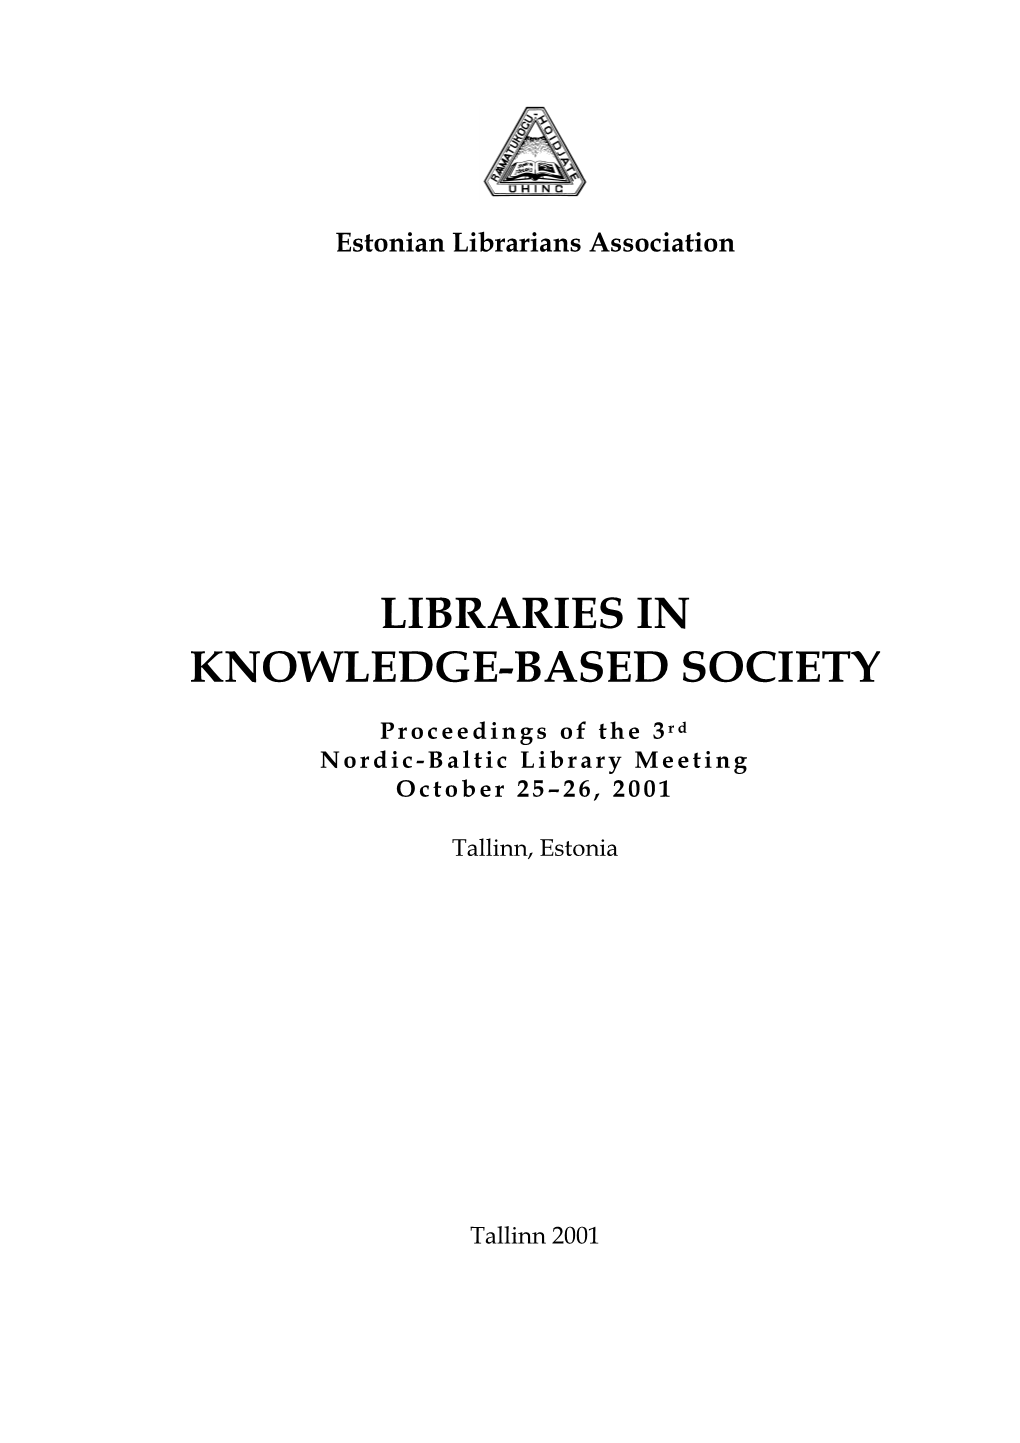 Libraries in Knowledge-Based Society